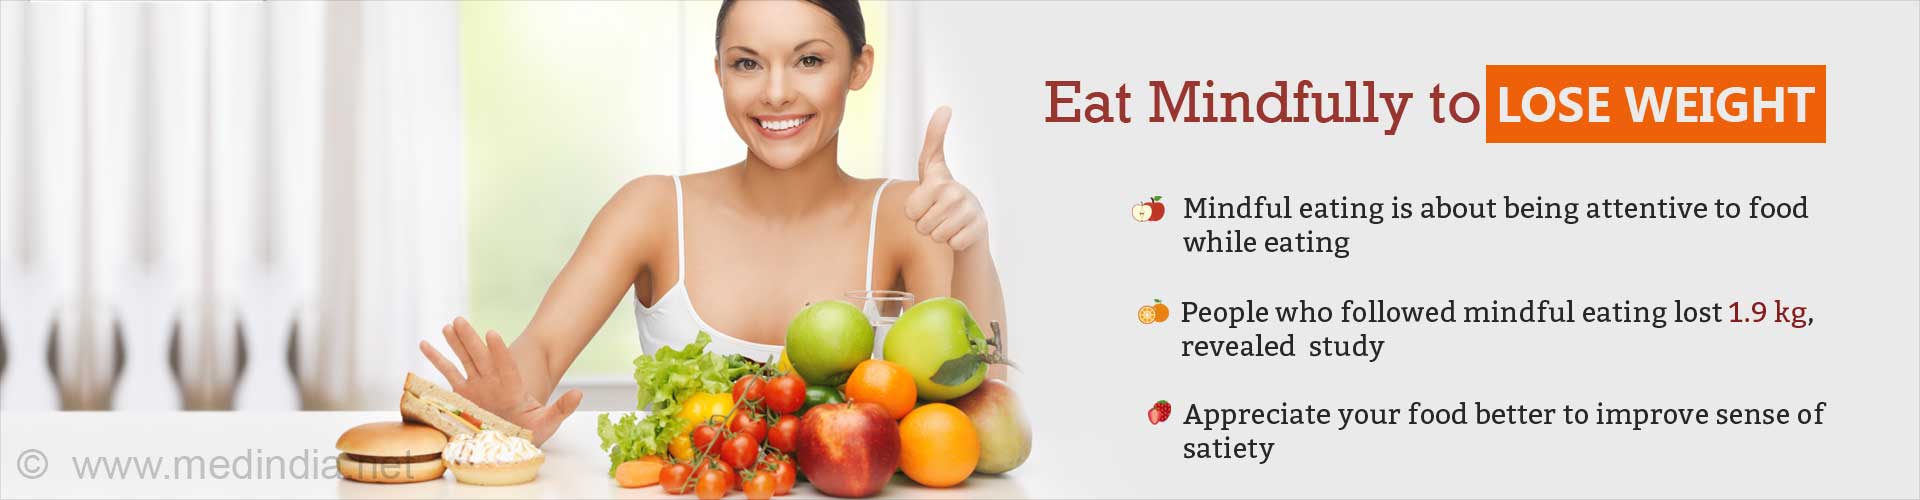 Eat mindfully to lose weight
- Mindful eating is about being attention to food while eating
- People who followed mindful eating lost. 1.9kg revealed study
- Appreciate your food better to improve sense of satiety